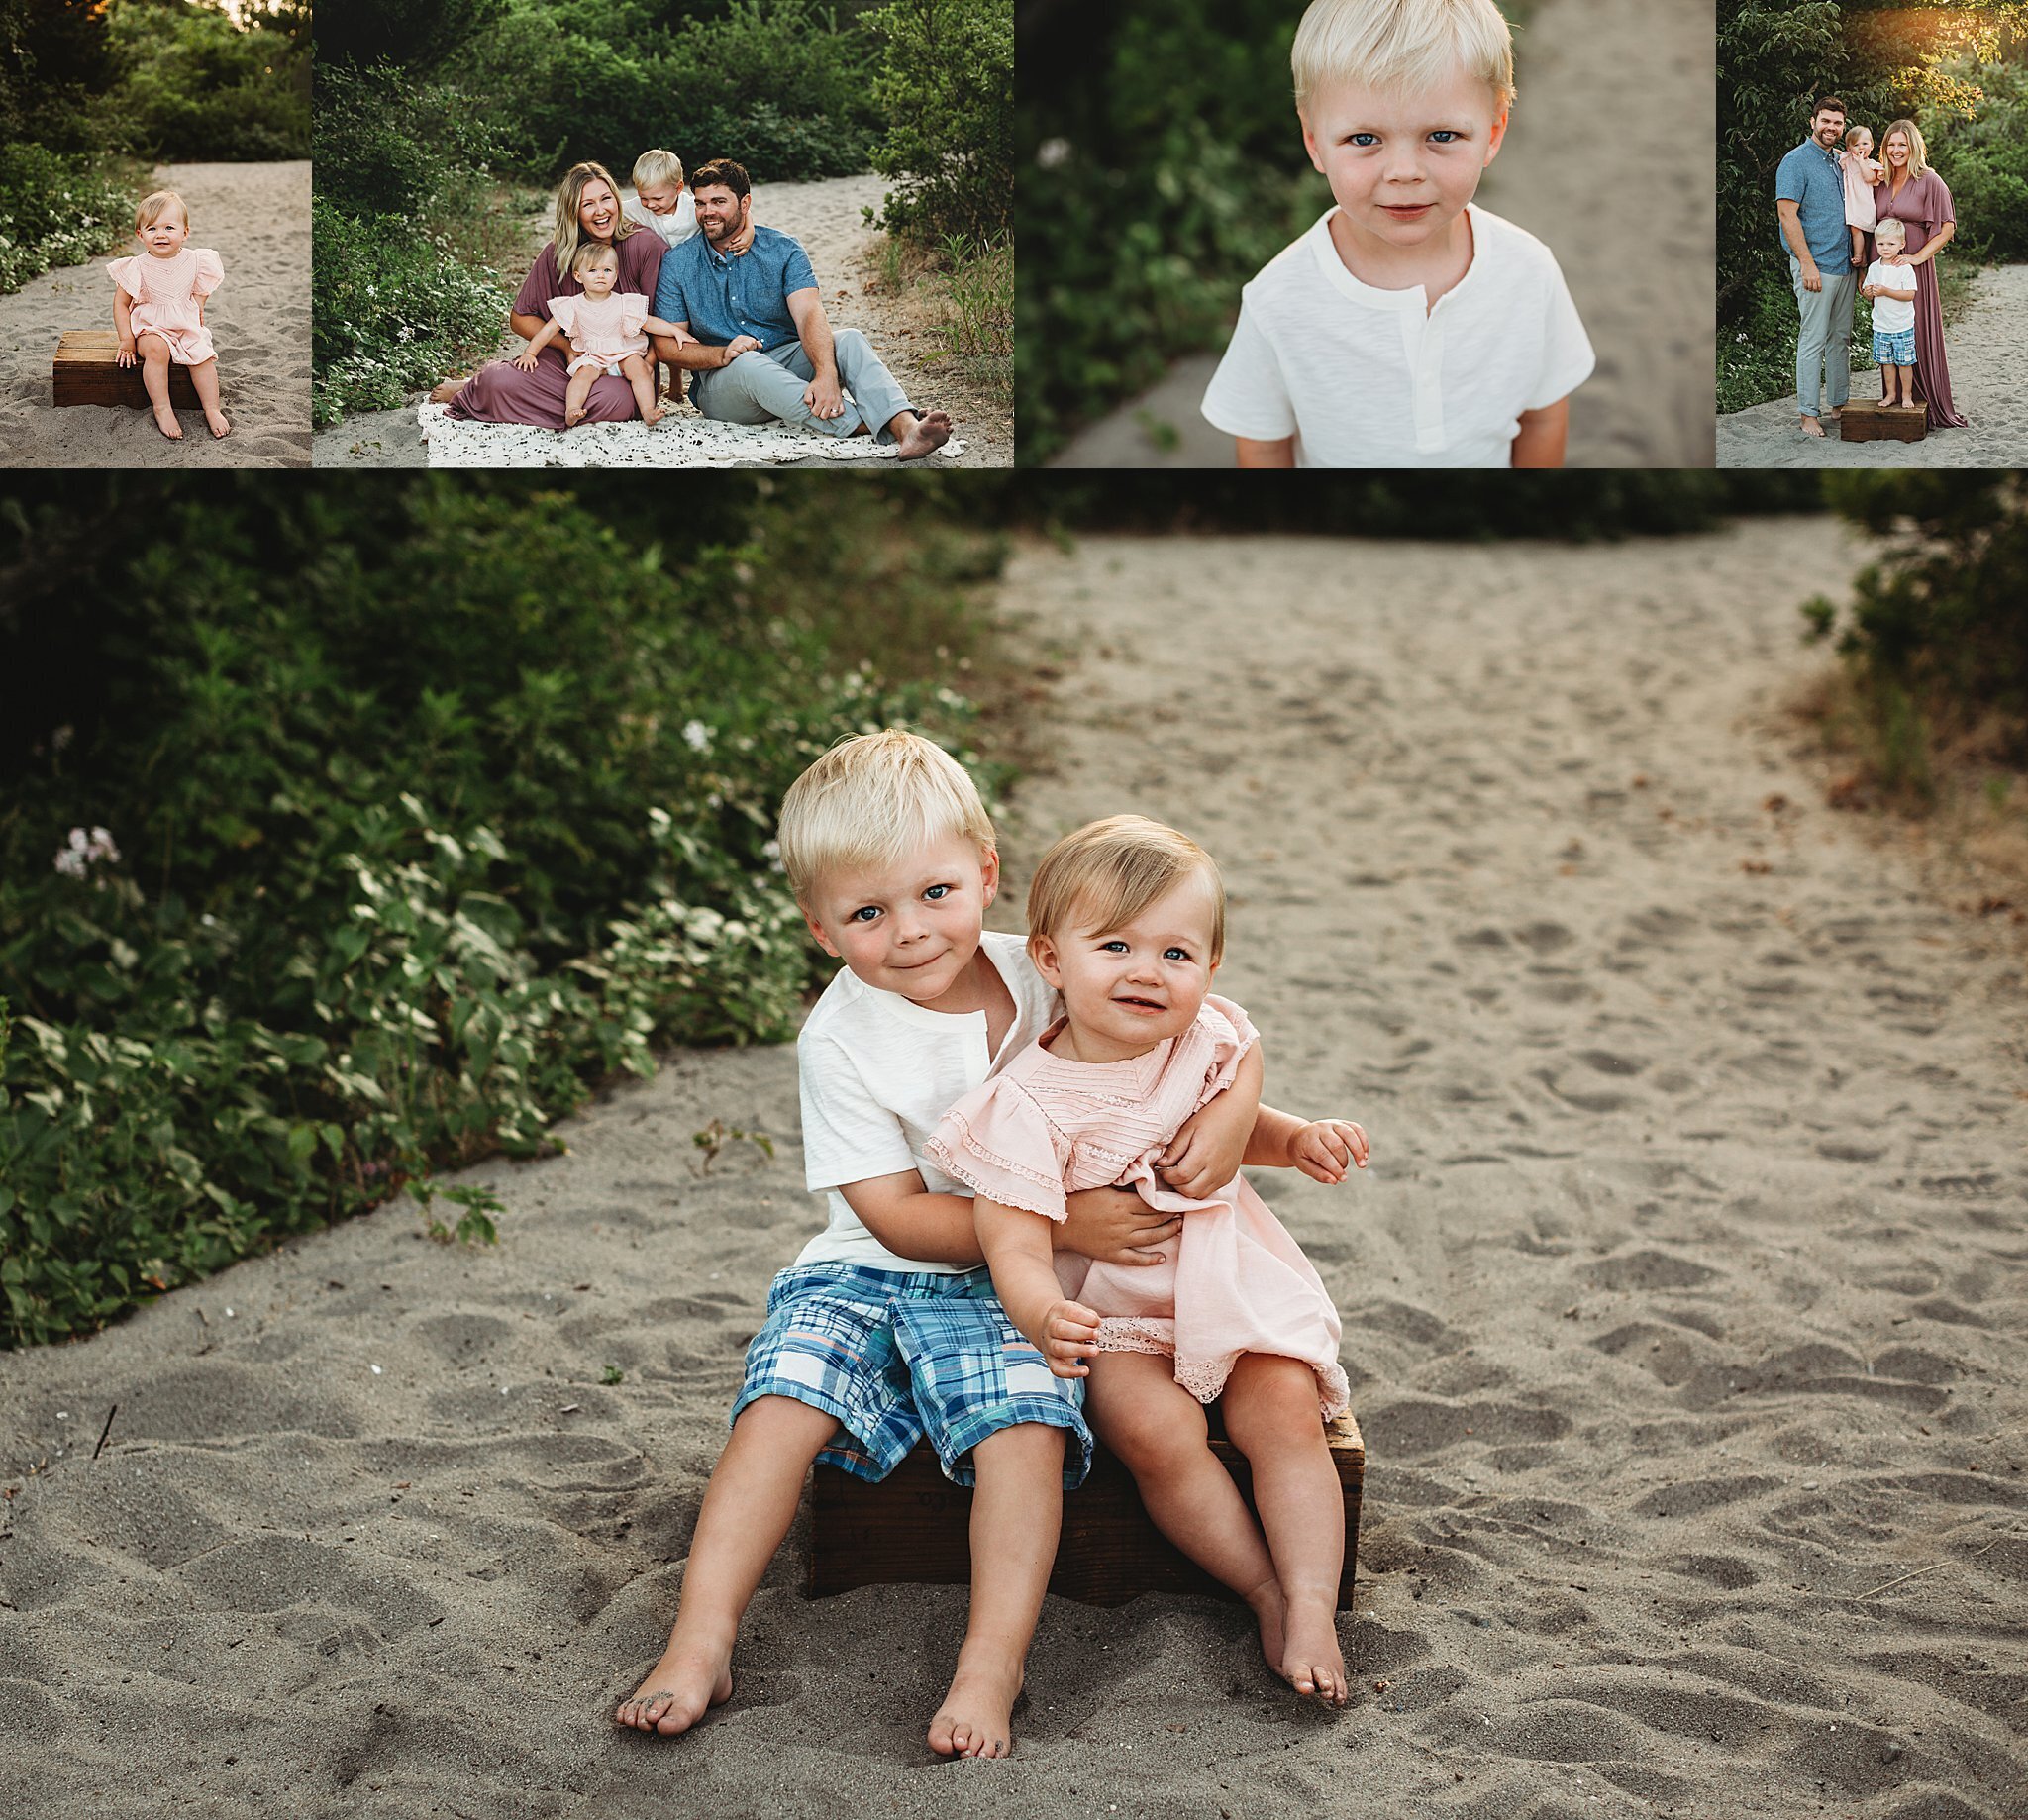 Stefanie-Cole-Photography-New-Haven-County-Beach-Family-Photoshoot.jpeg